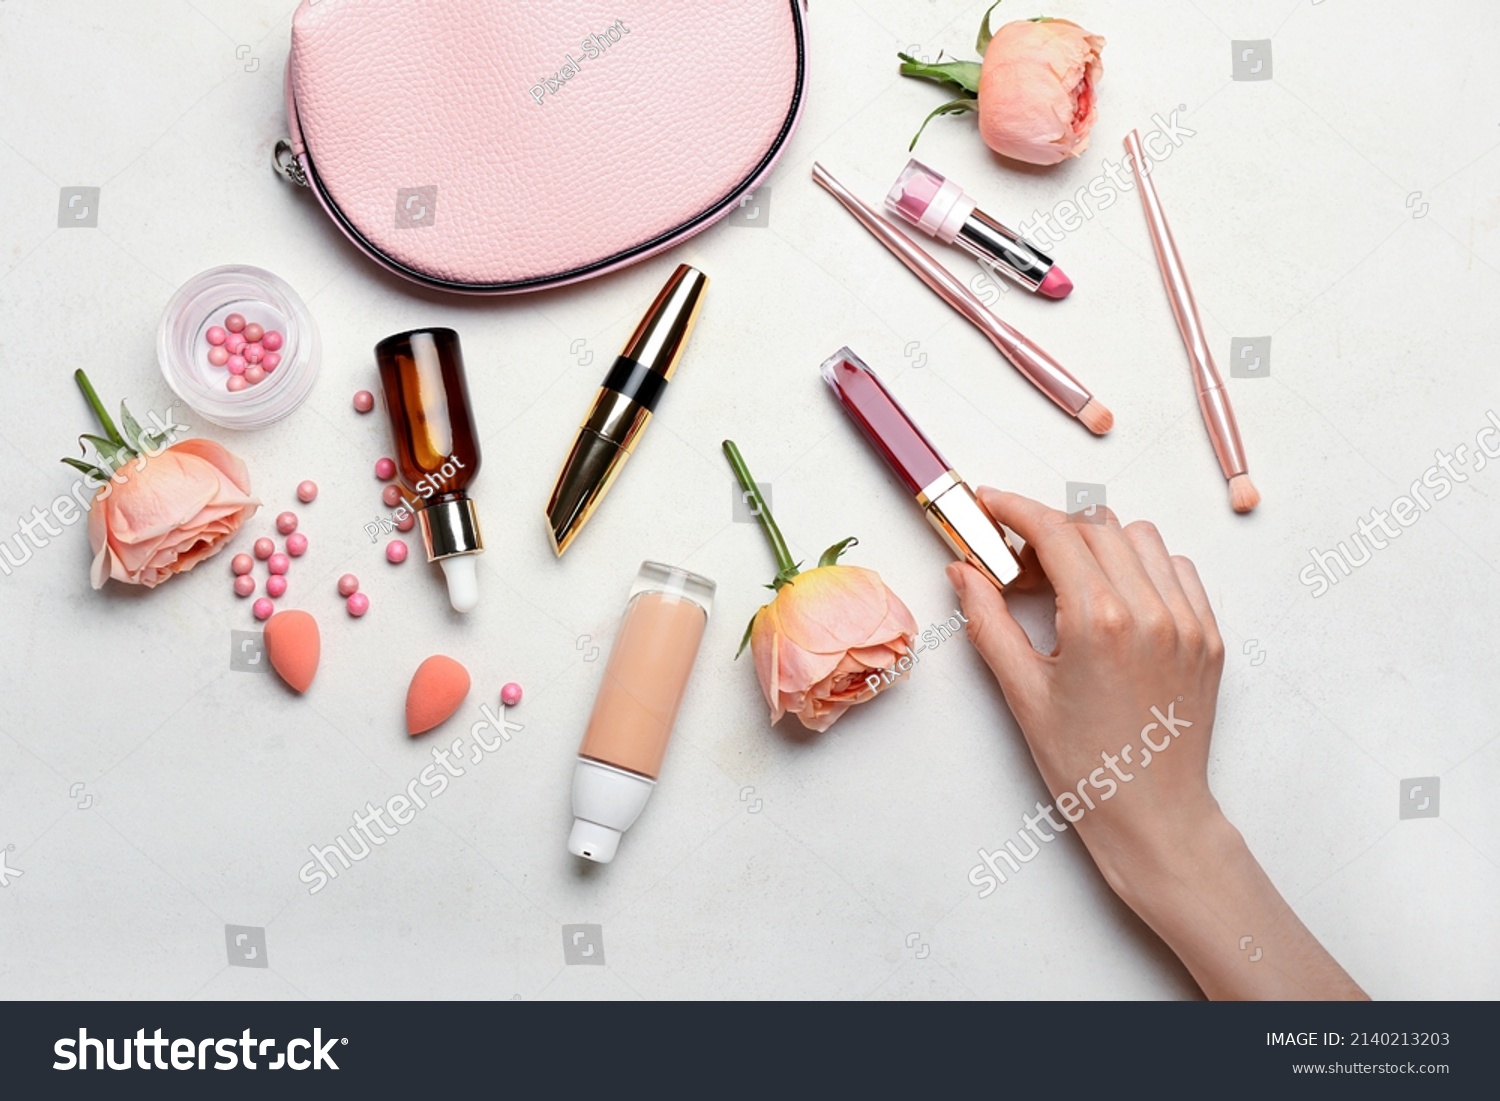 Female hand with decorative cosmetics, bag and rose flowers on light background #2140213203